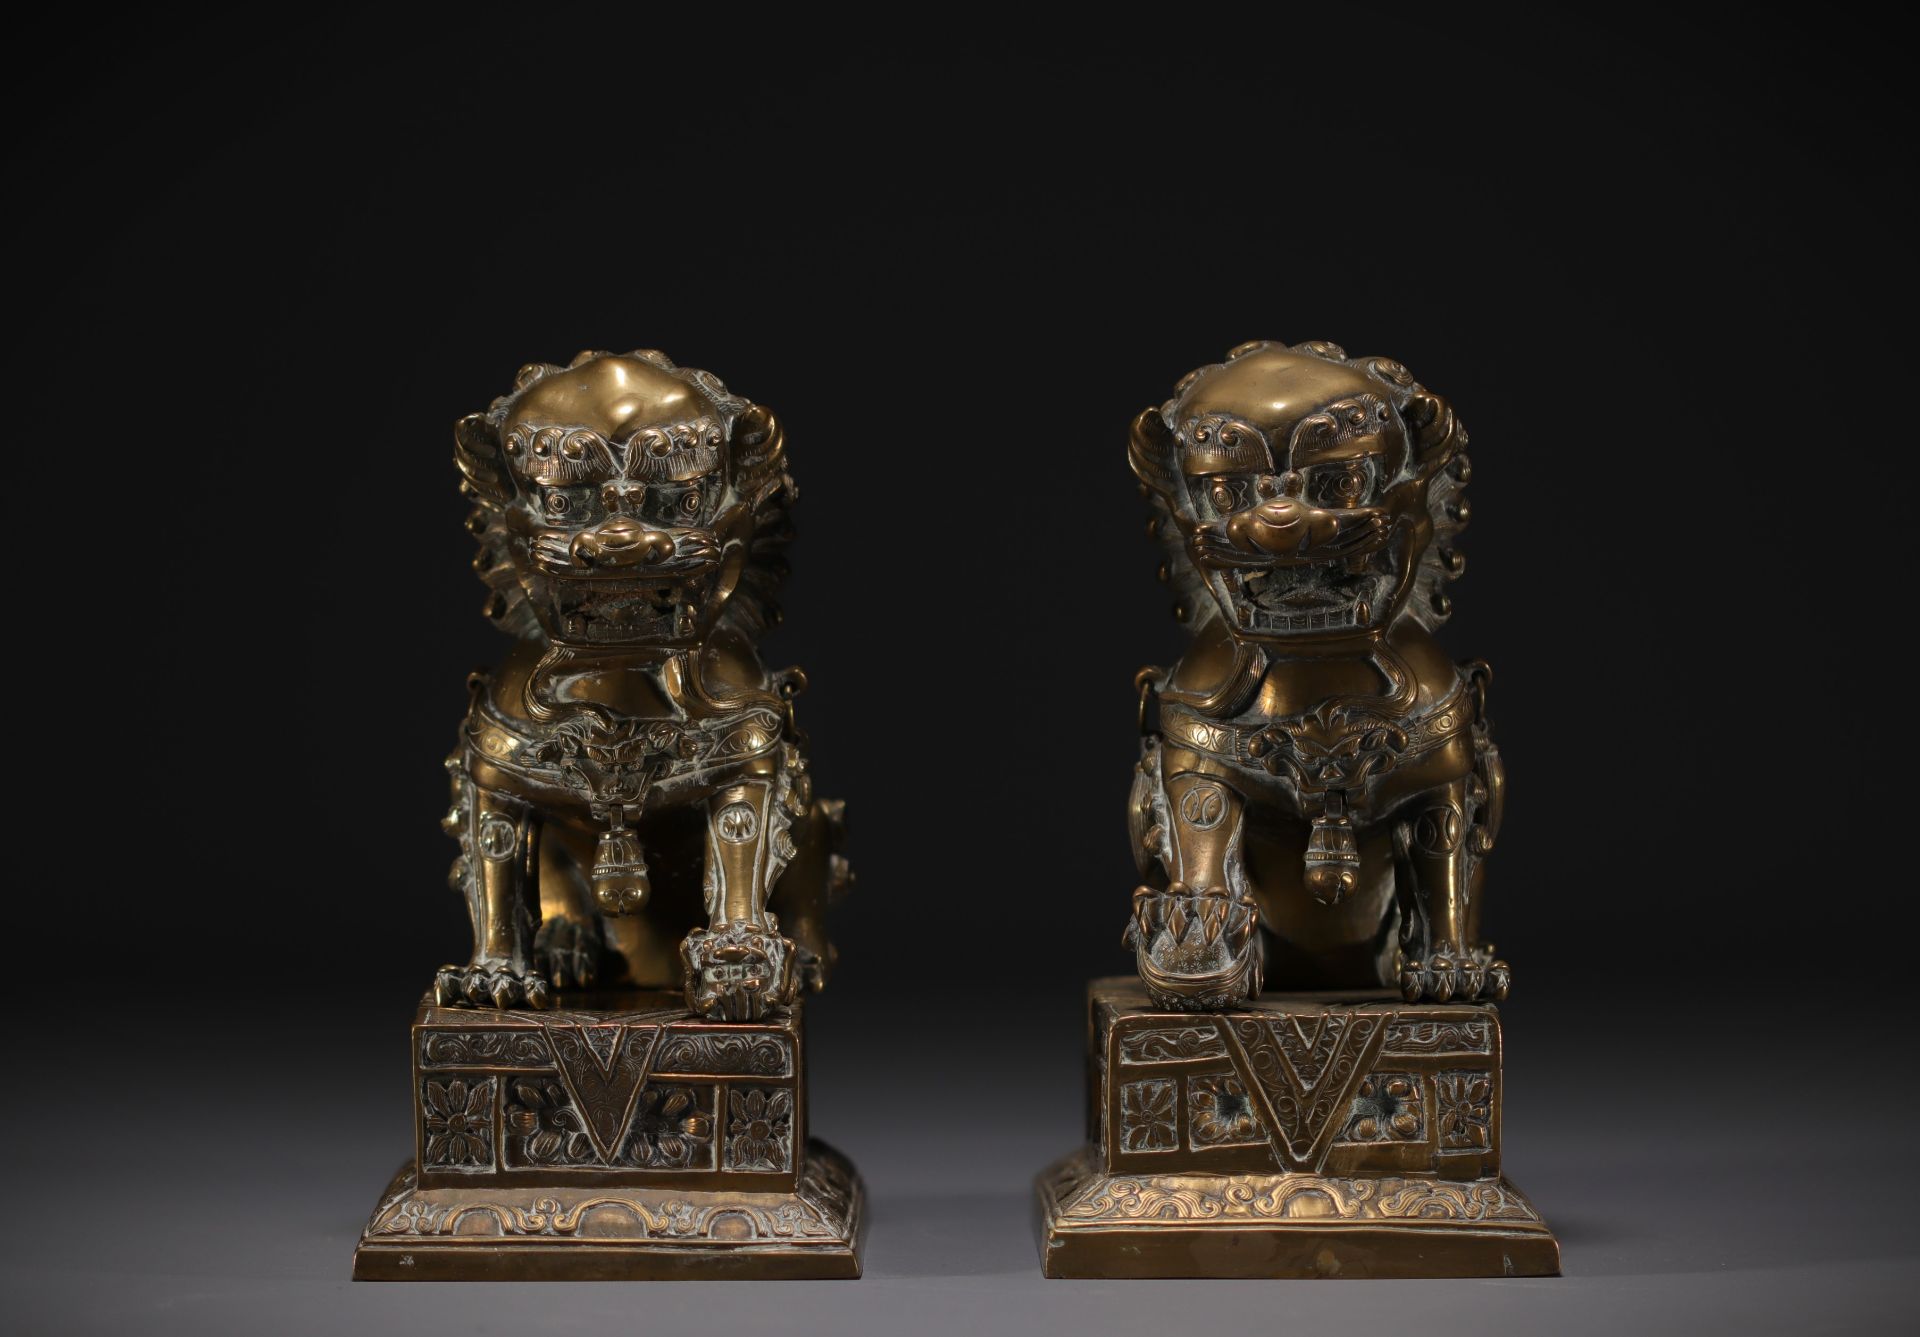 China - Pair of bronze Lions of Fo.